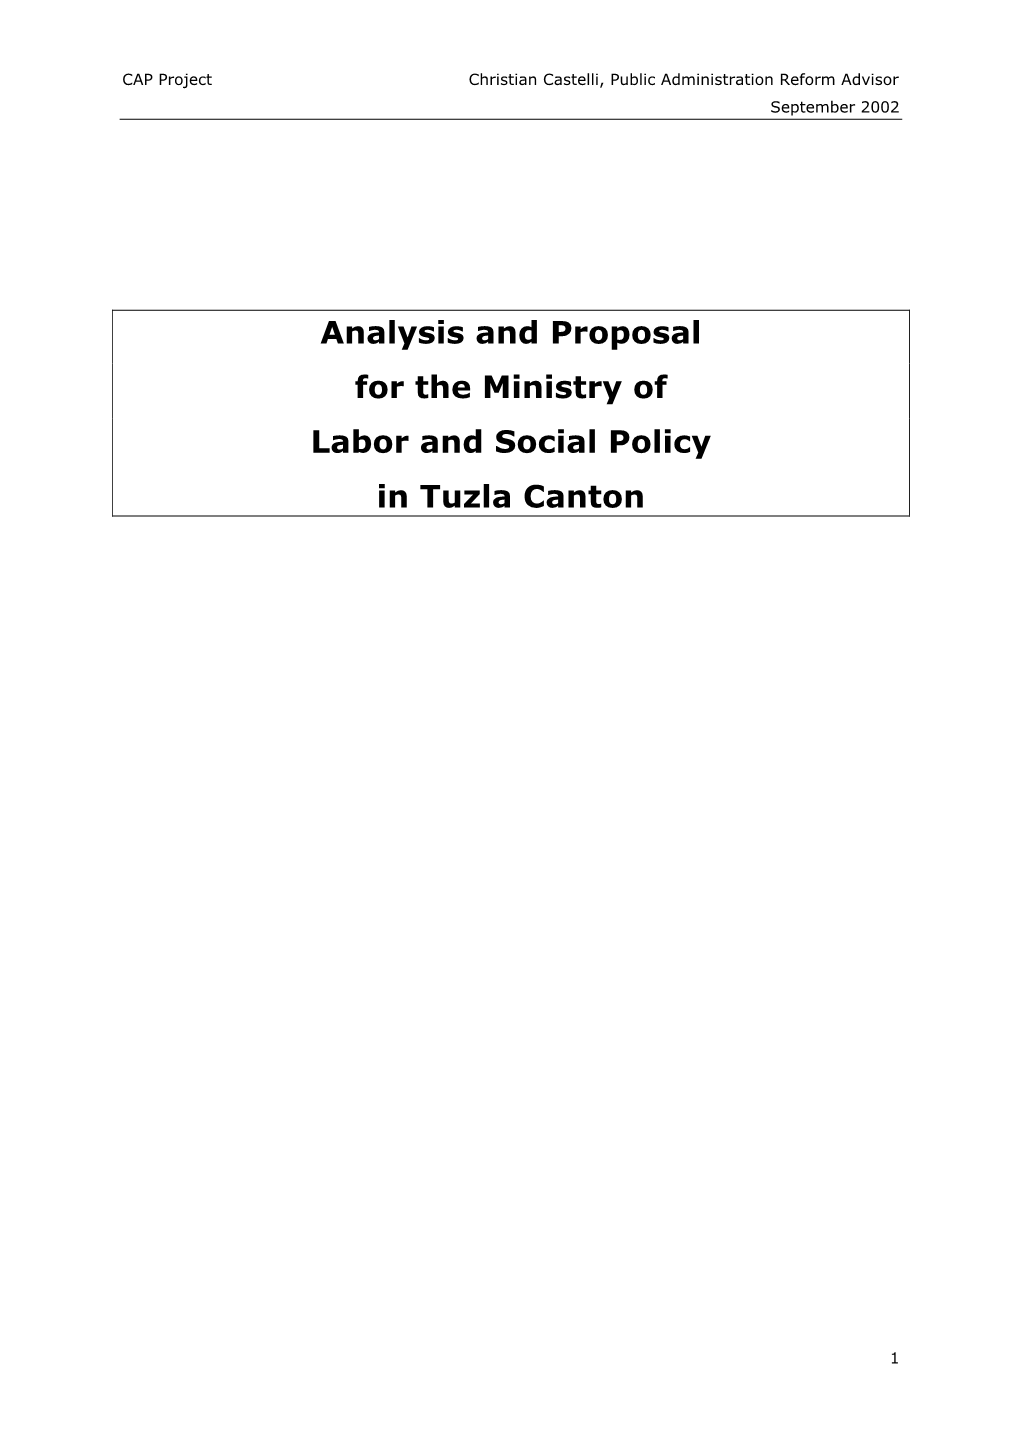 Analysis and Proposal for the Ministry of Labor and Social Policy in Tuzla Canton